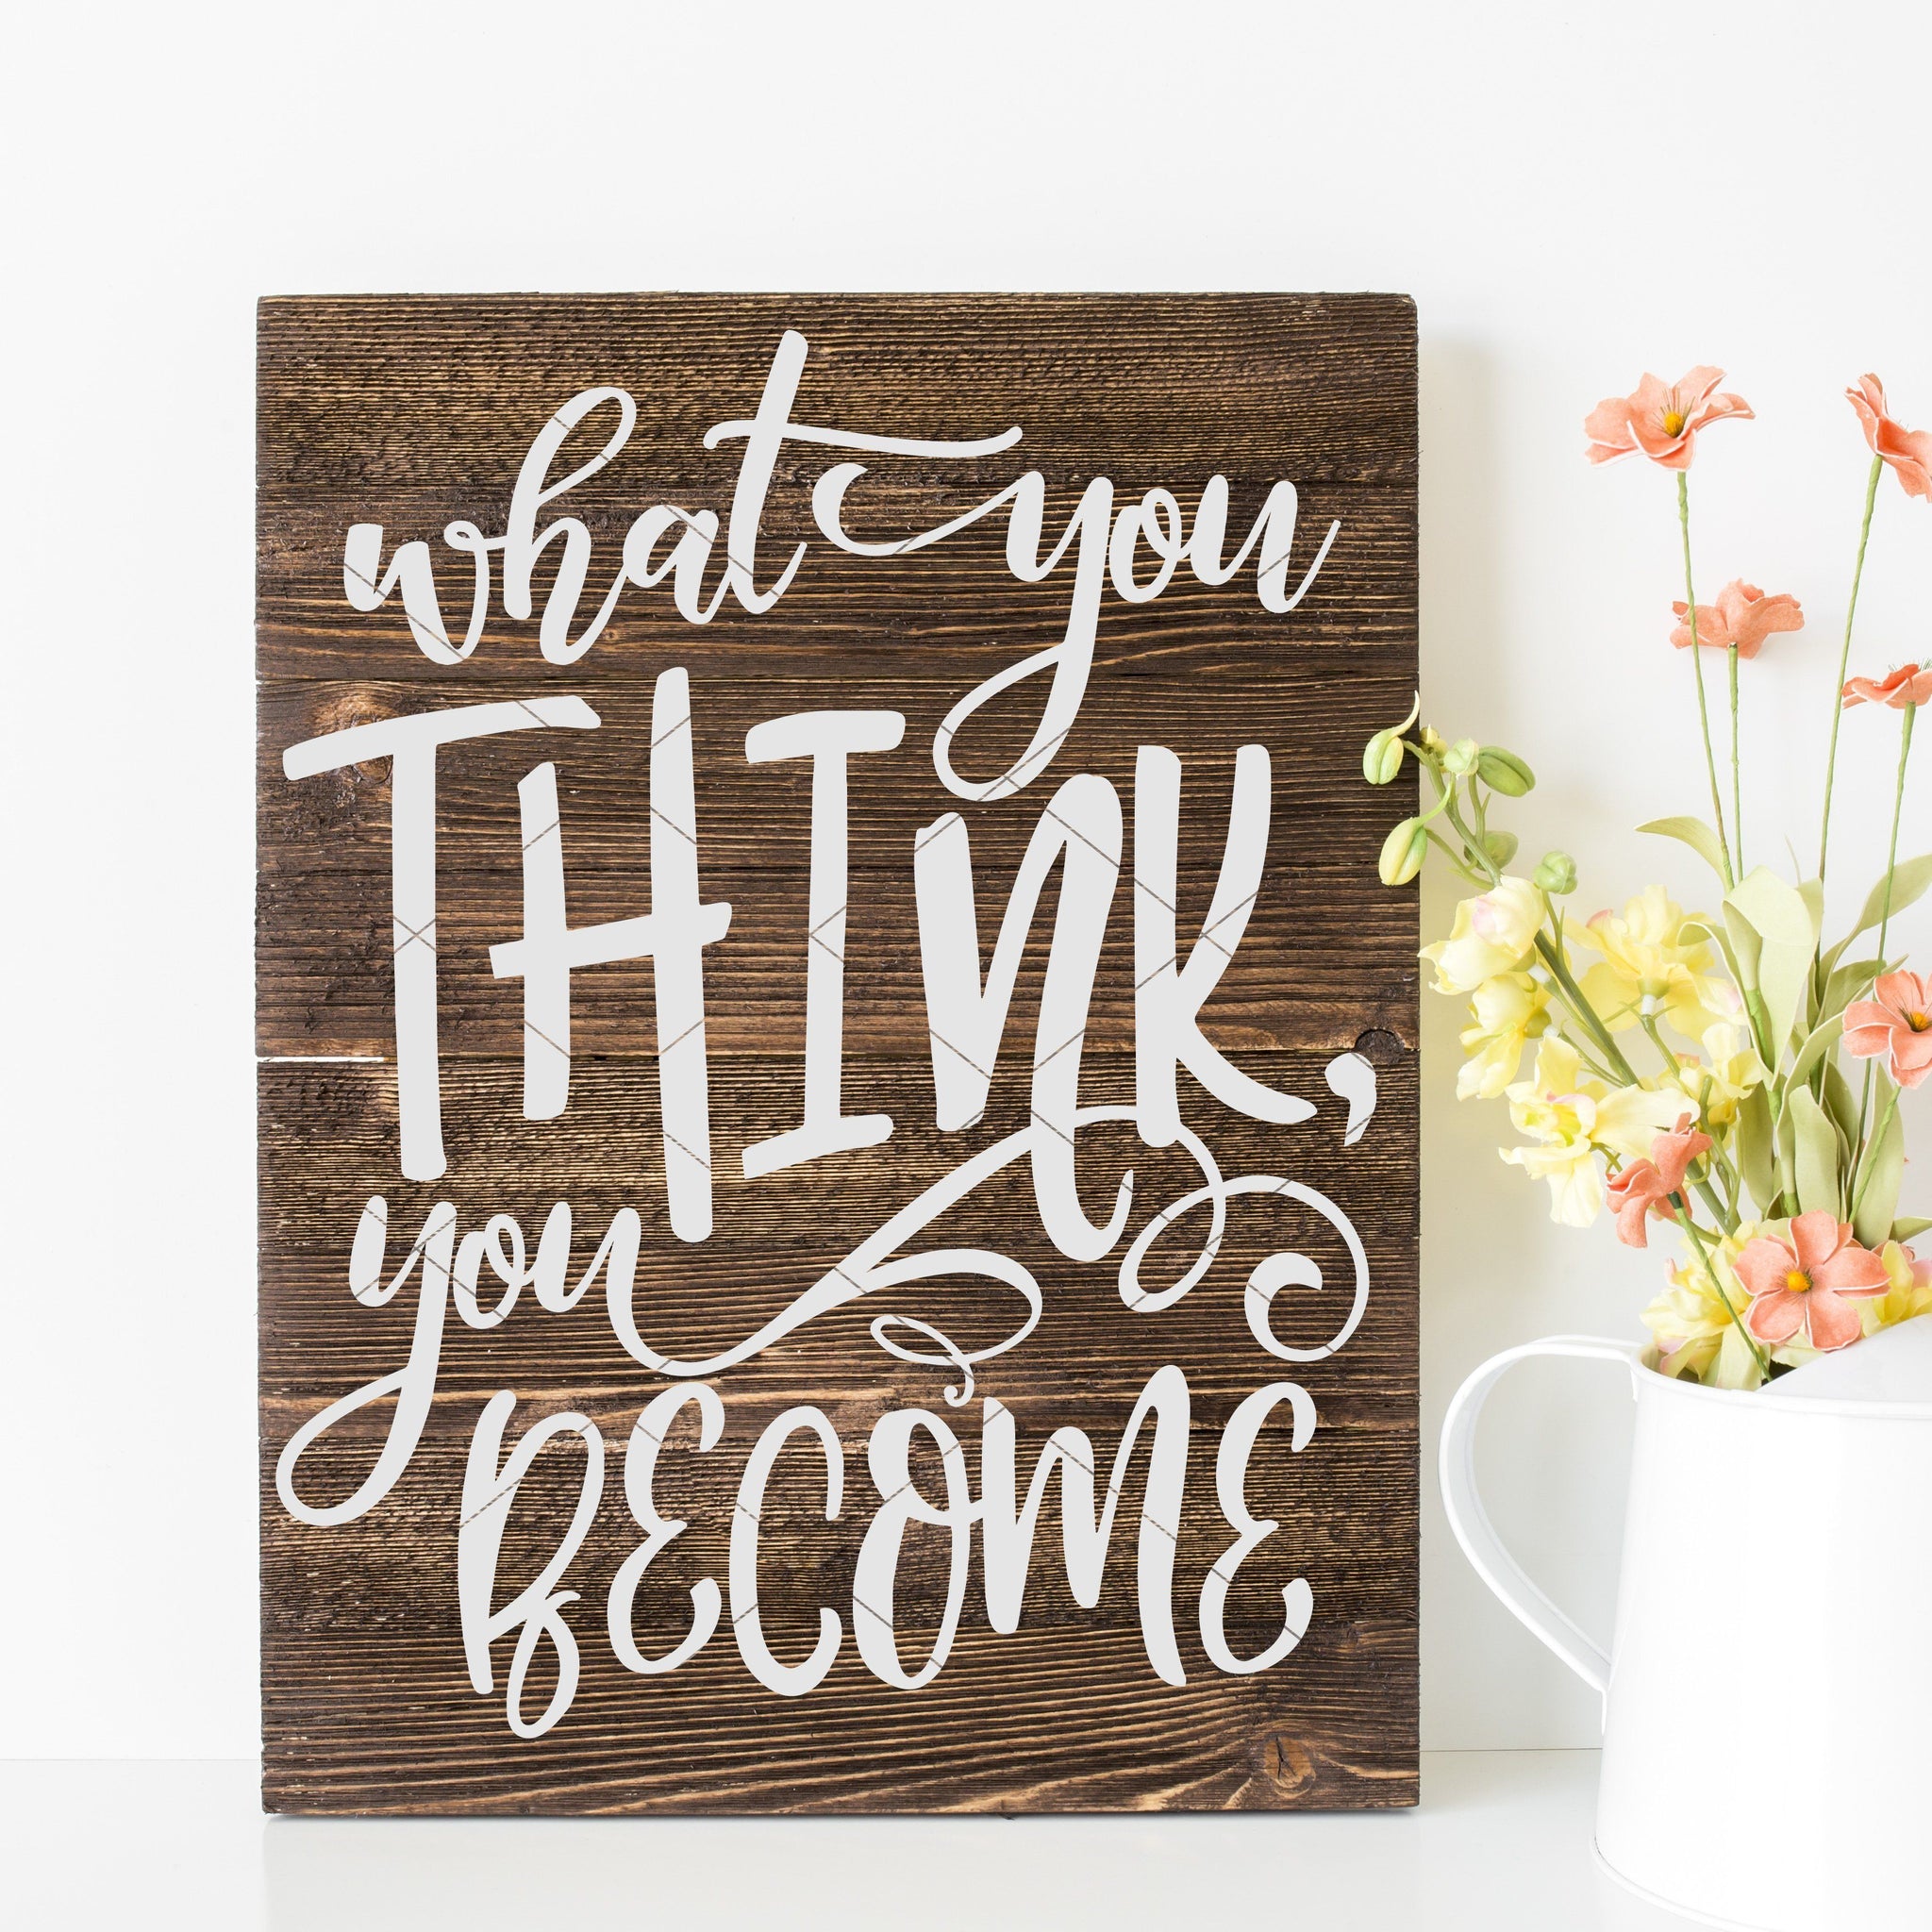 What You Think You Become Quote SVG File - Commercial Use SVG Files for Cricut & Silhouette